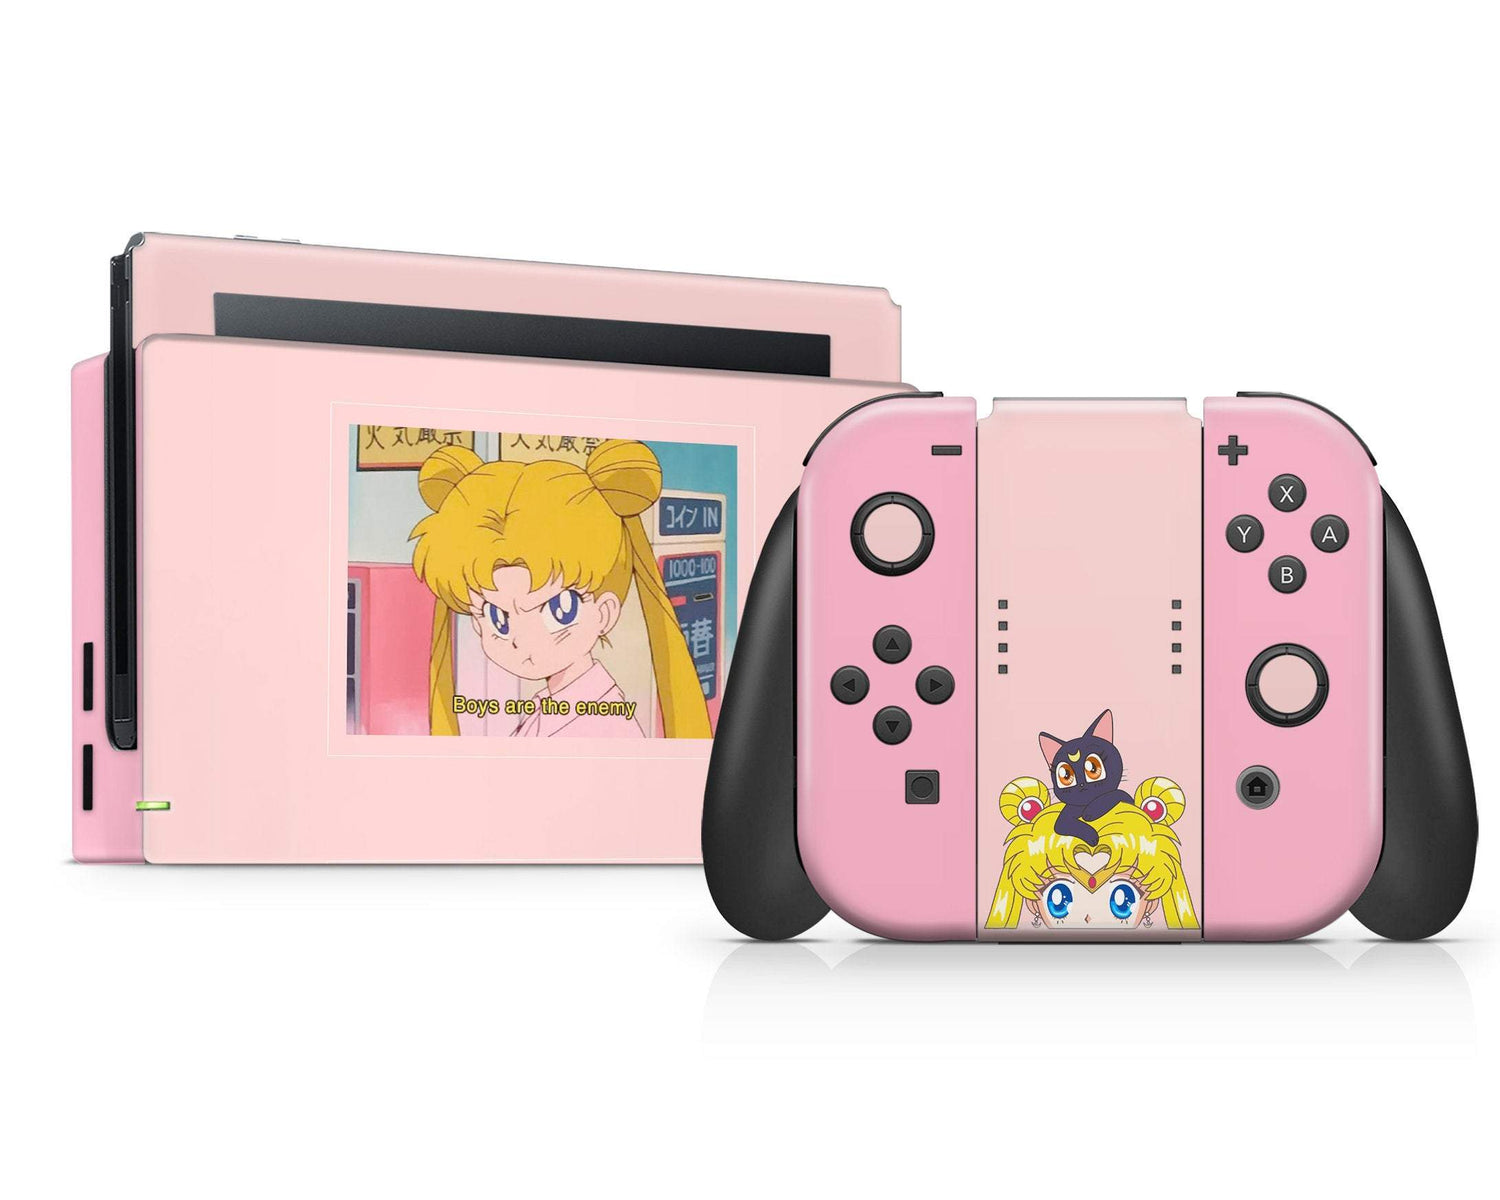 Lux Skins Nintendo Switch Sailor Moon Boys are the Enemy Full Set Skins - Pop culture Sailor Moon Skin